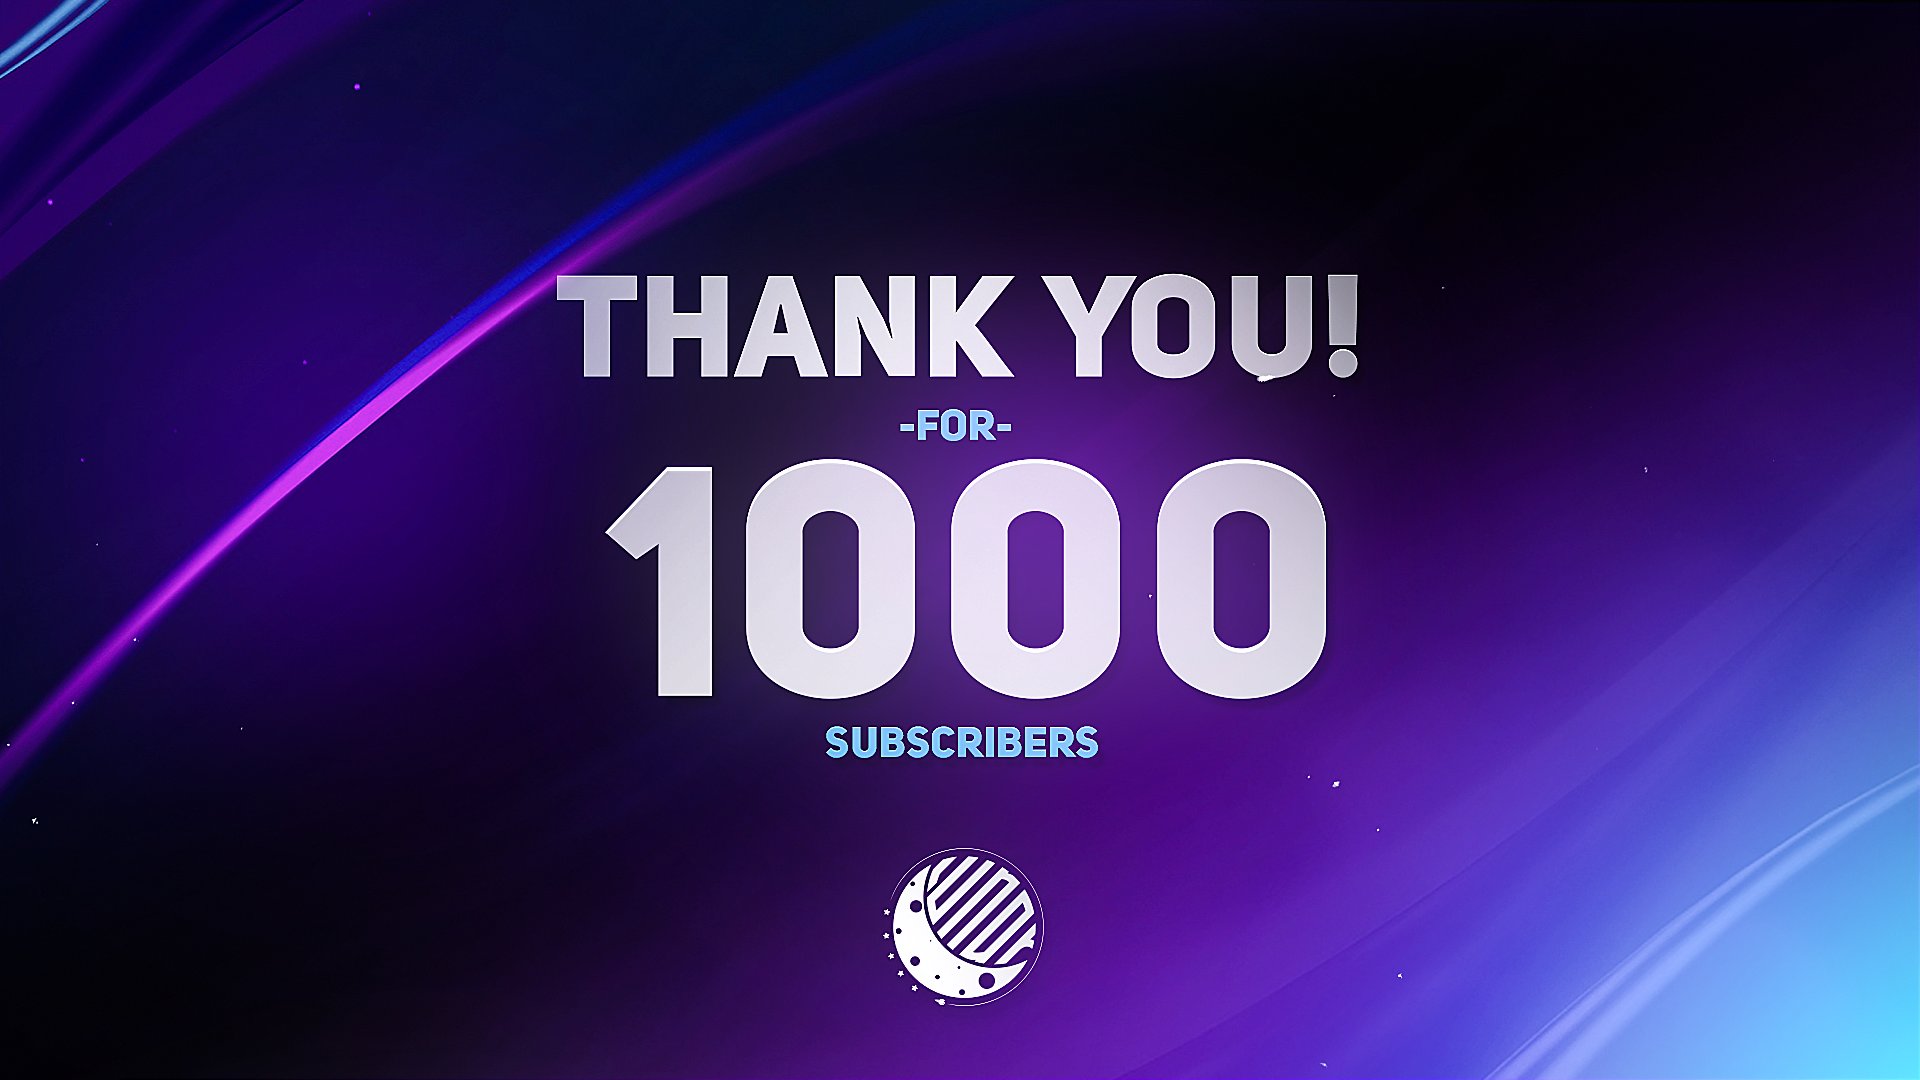 Lunar United you all so much for 1000 subscribers 2020 is our year!